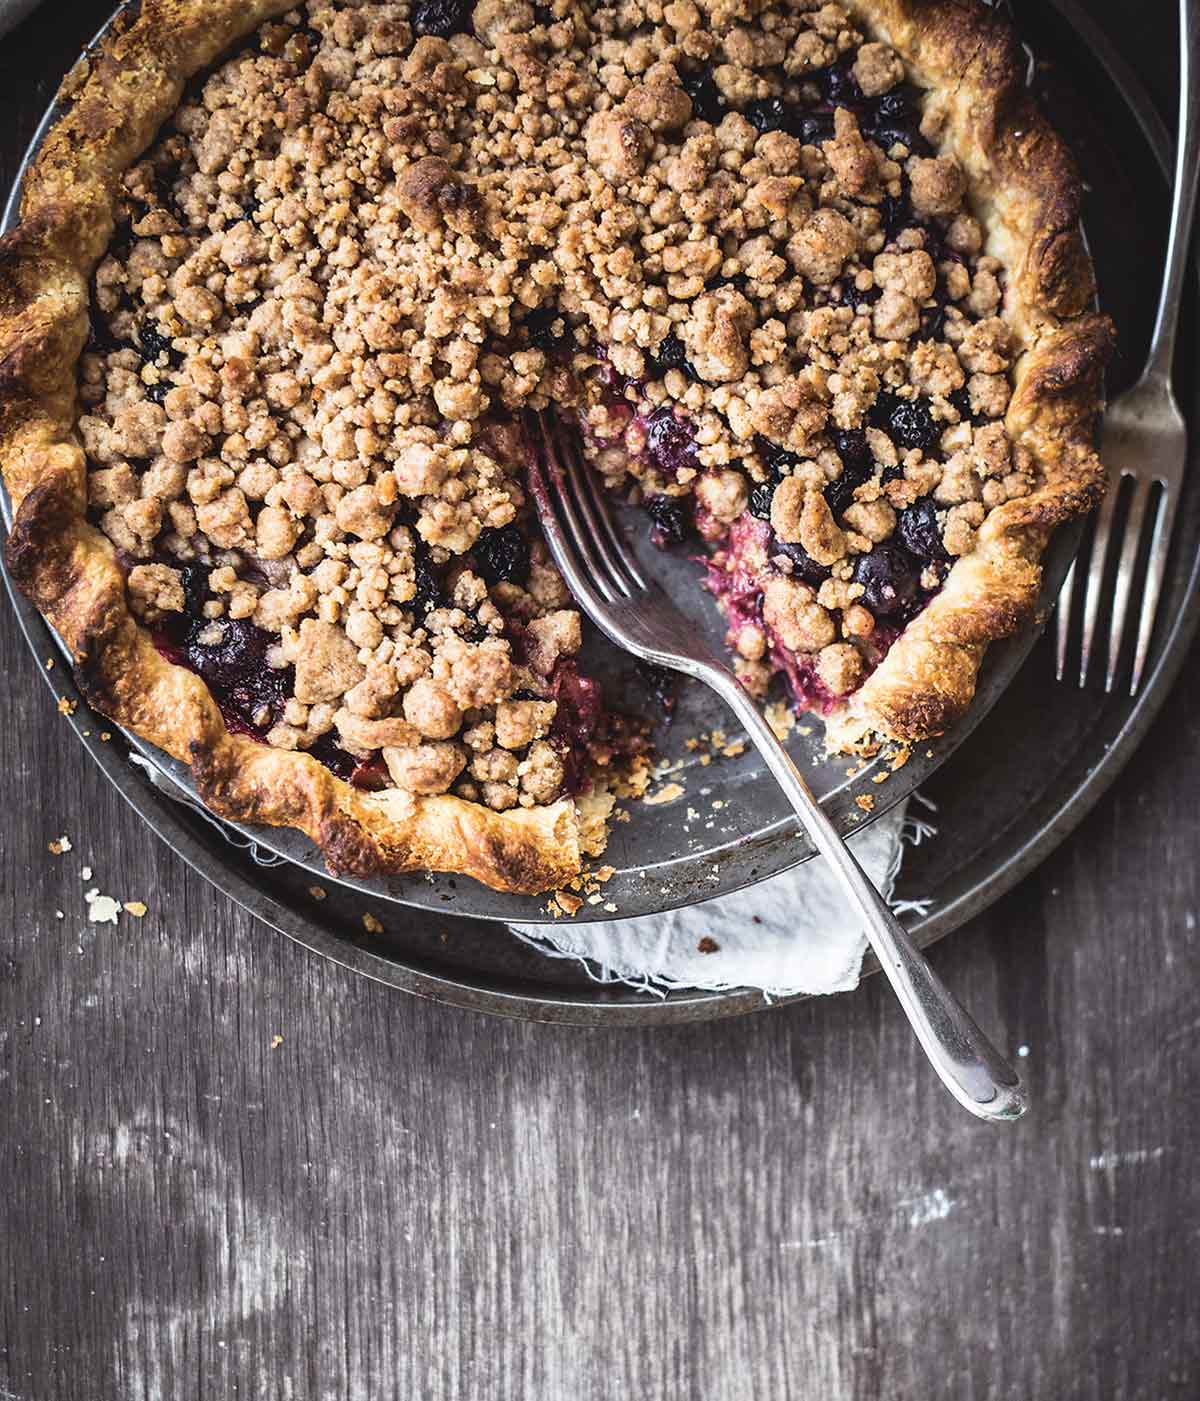 A bluebarb pie with one slice missing and two forks resting beside the blueberry and rhubarb pie.